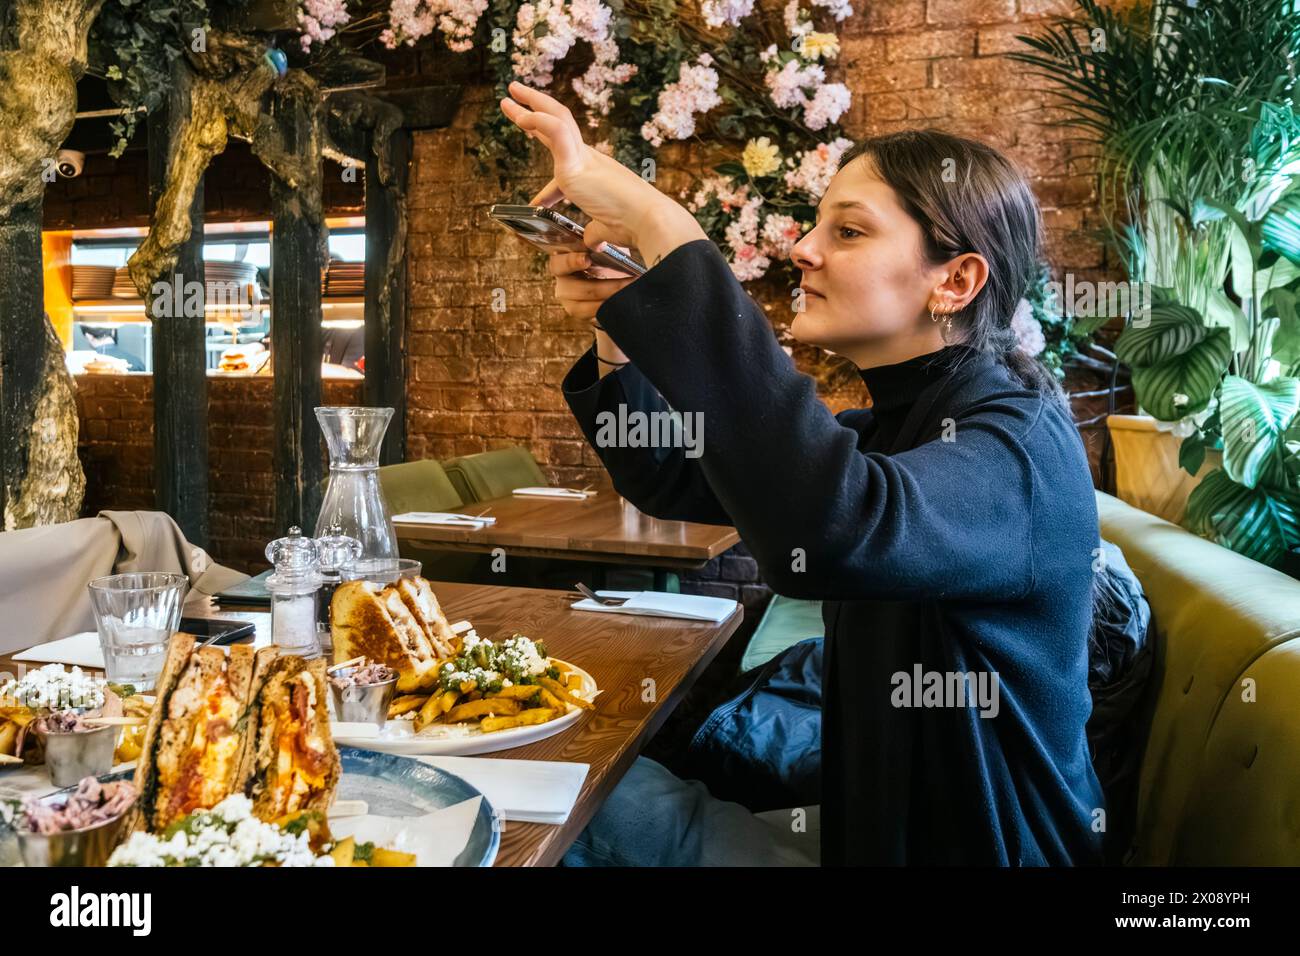 In a quaint restaurant setting, a content diner snaps a picture of a tempting sandwich with her phone, surrounded by lush foliage decor Stock Photo